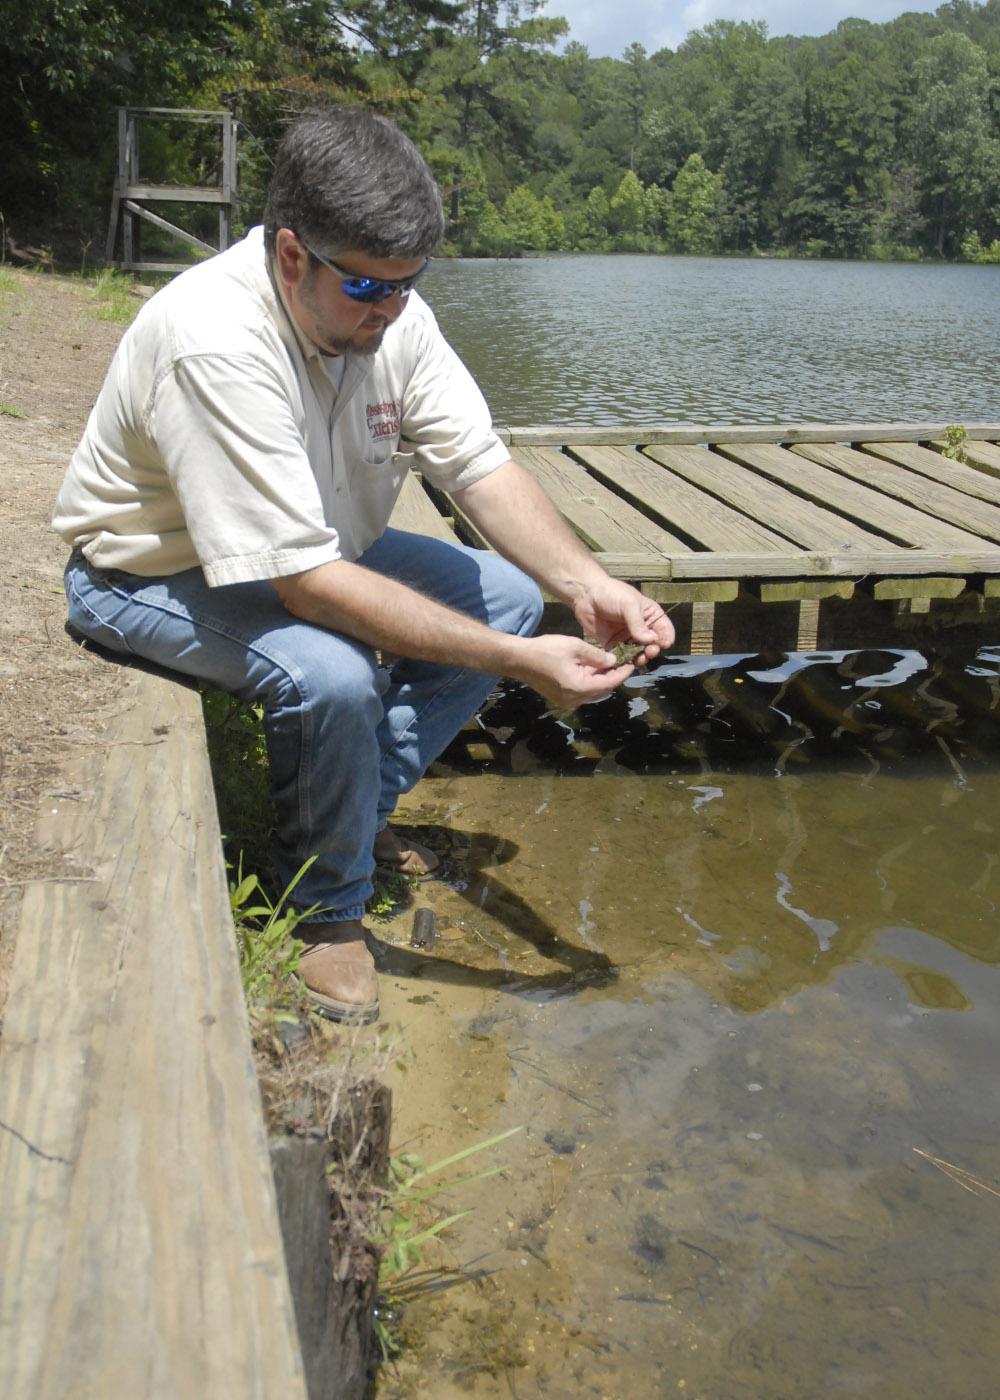 Chickasaw County Extension director Scott Cagle examines the last of some pond weeds in the lake at Camp Tik-A-Witha, operated by the Girl Scouts Heart of the South organization. Cagle helped the camp locate donors to pay for stocking grass carp to restore the lake to swimming quality. (Photo by Linda Breazeale)